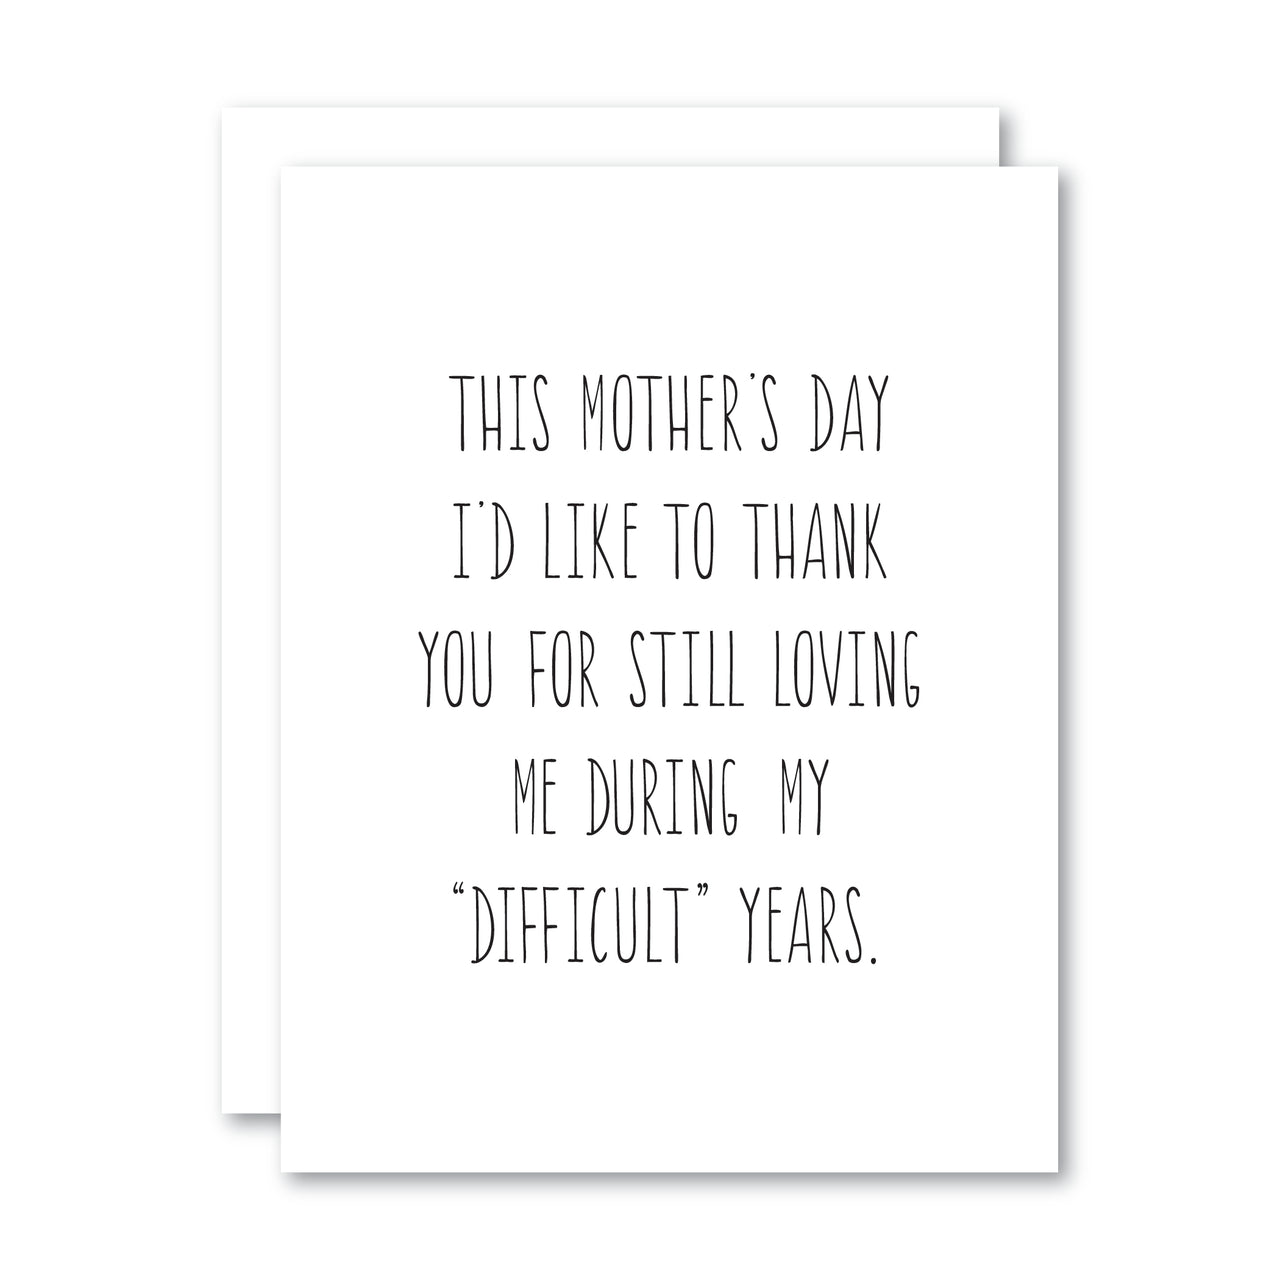 This Mother's Day...